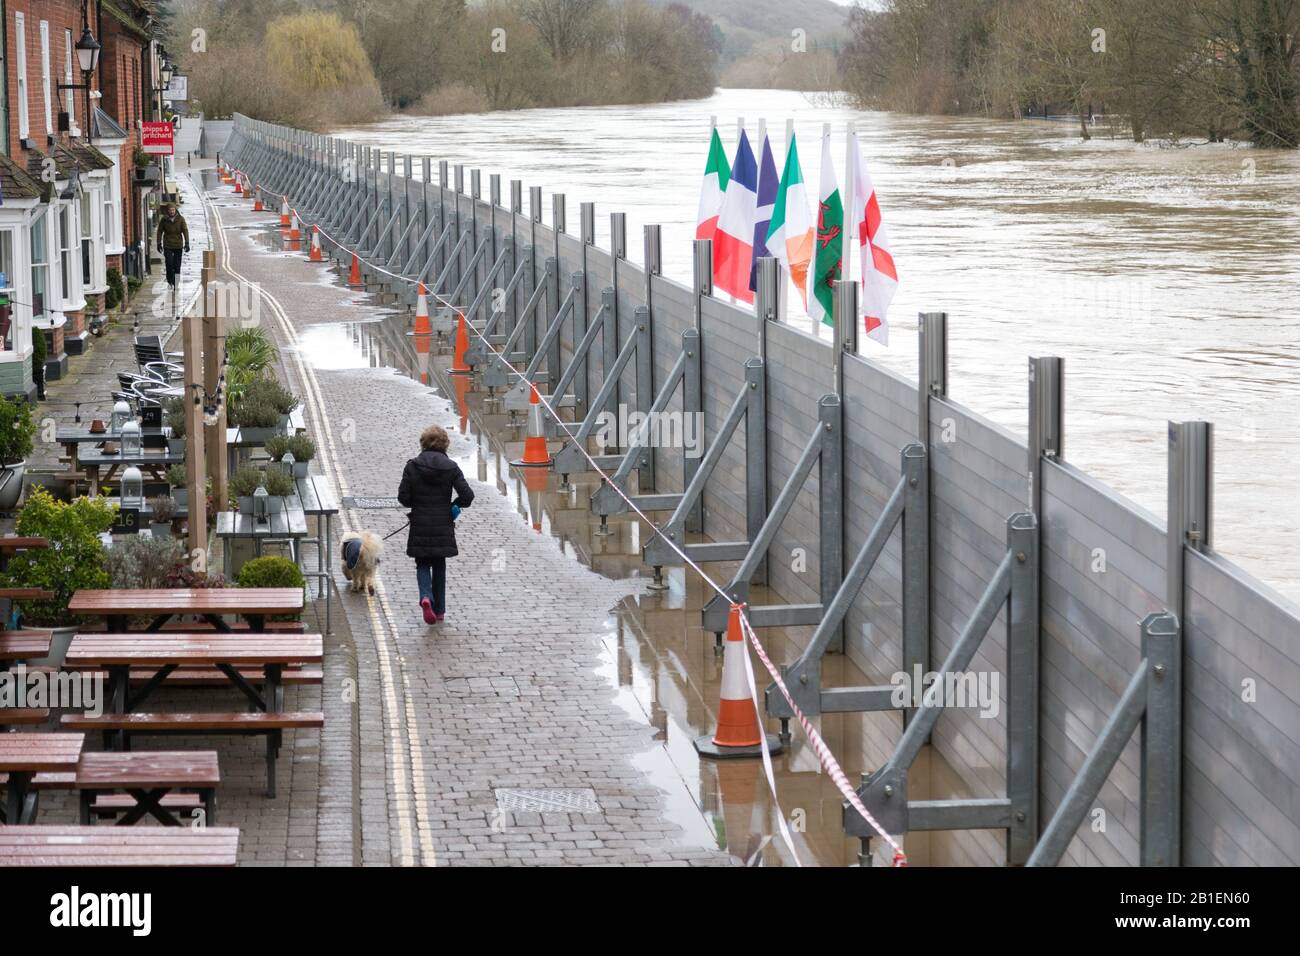 Bewdley, Worcestershire, UK. 25th Feb, 2020. The River Severn at Bewdley continues to rise after rain in Wales last weekend increased the flow. Flood barriers have been re-erected in the last 48 hours. Credit: Peter Lopeman/Alamy Live News Stock Photo